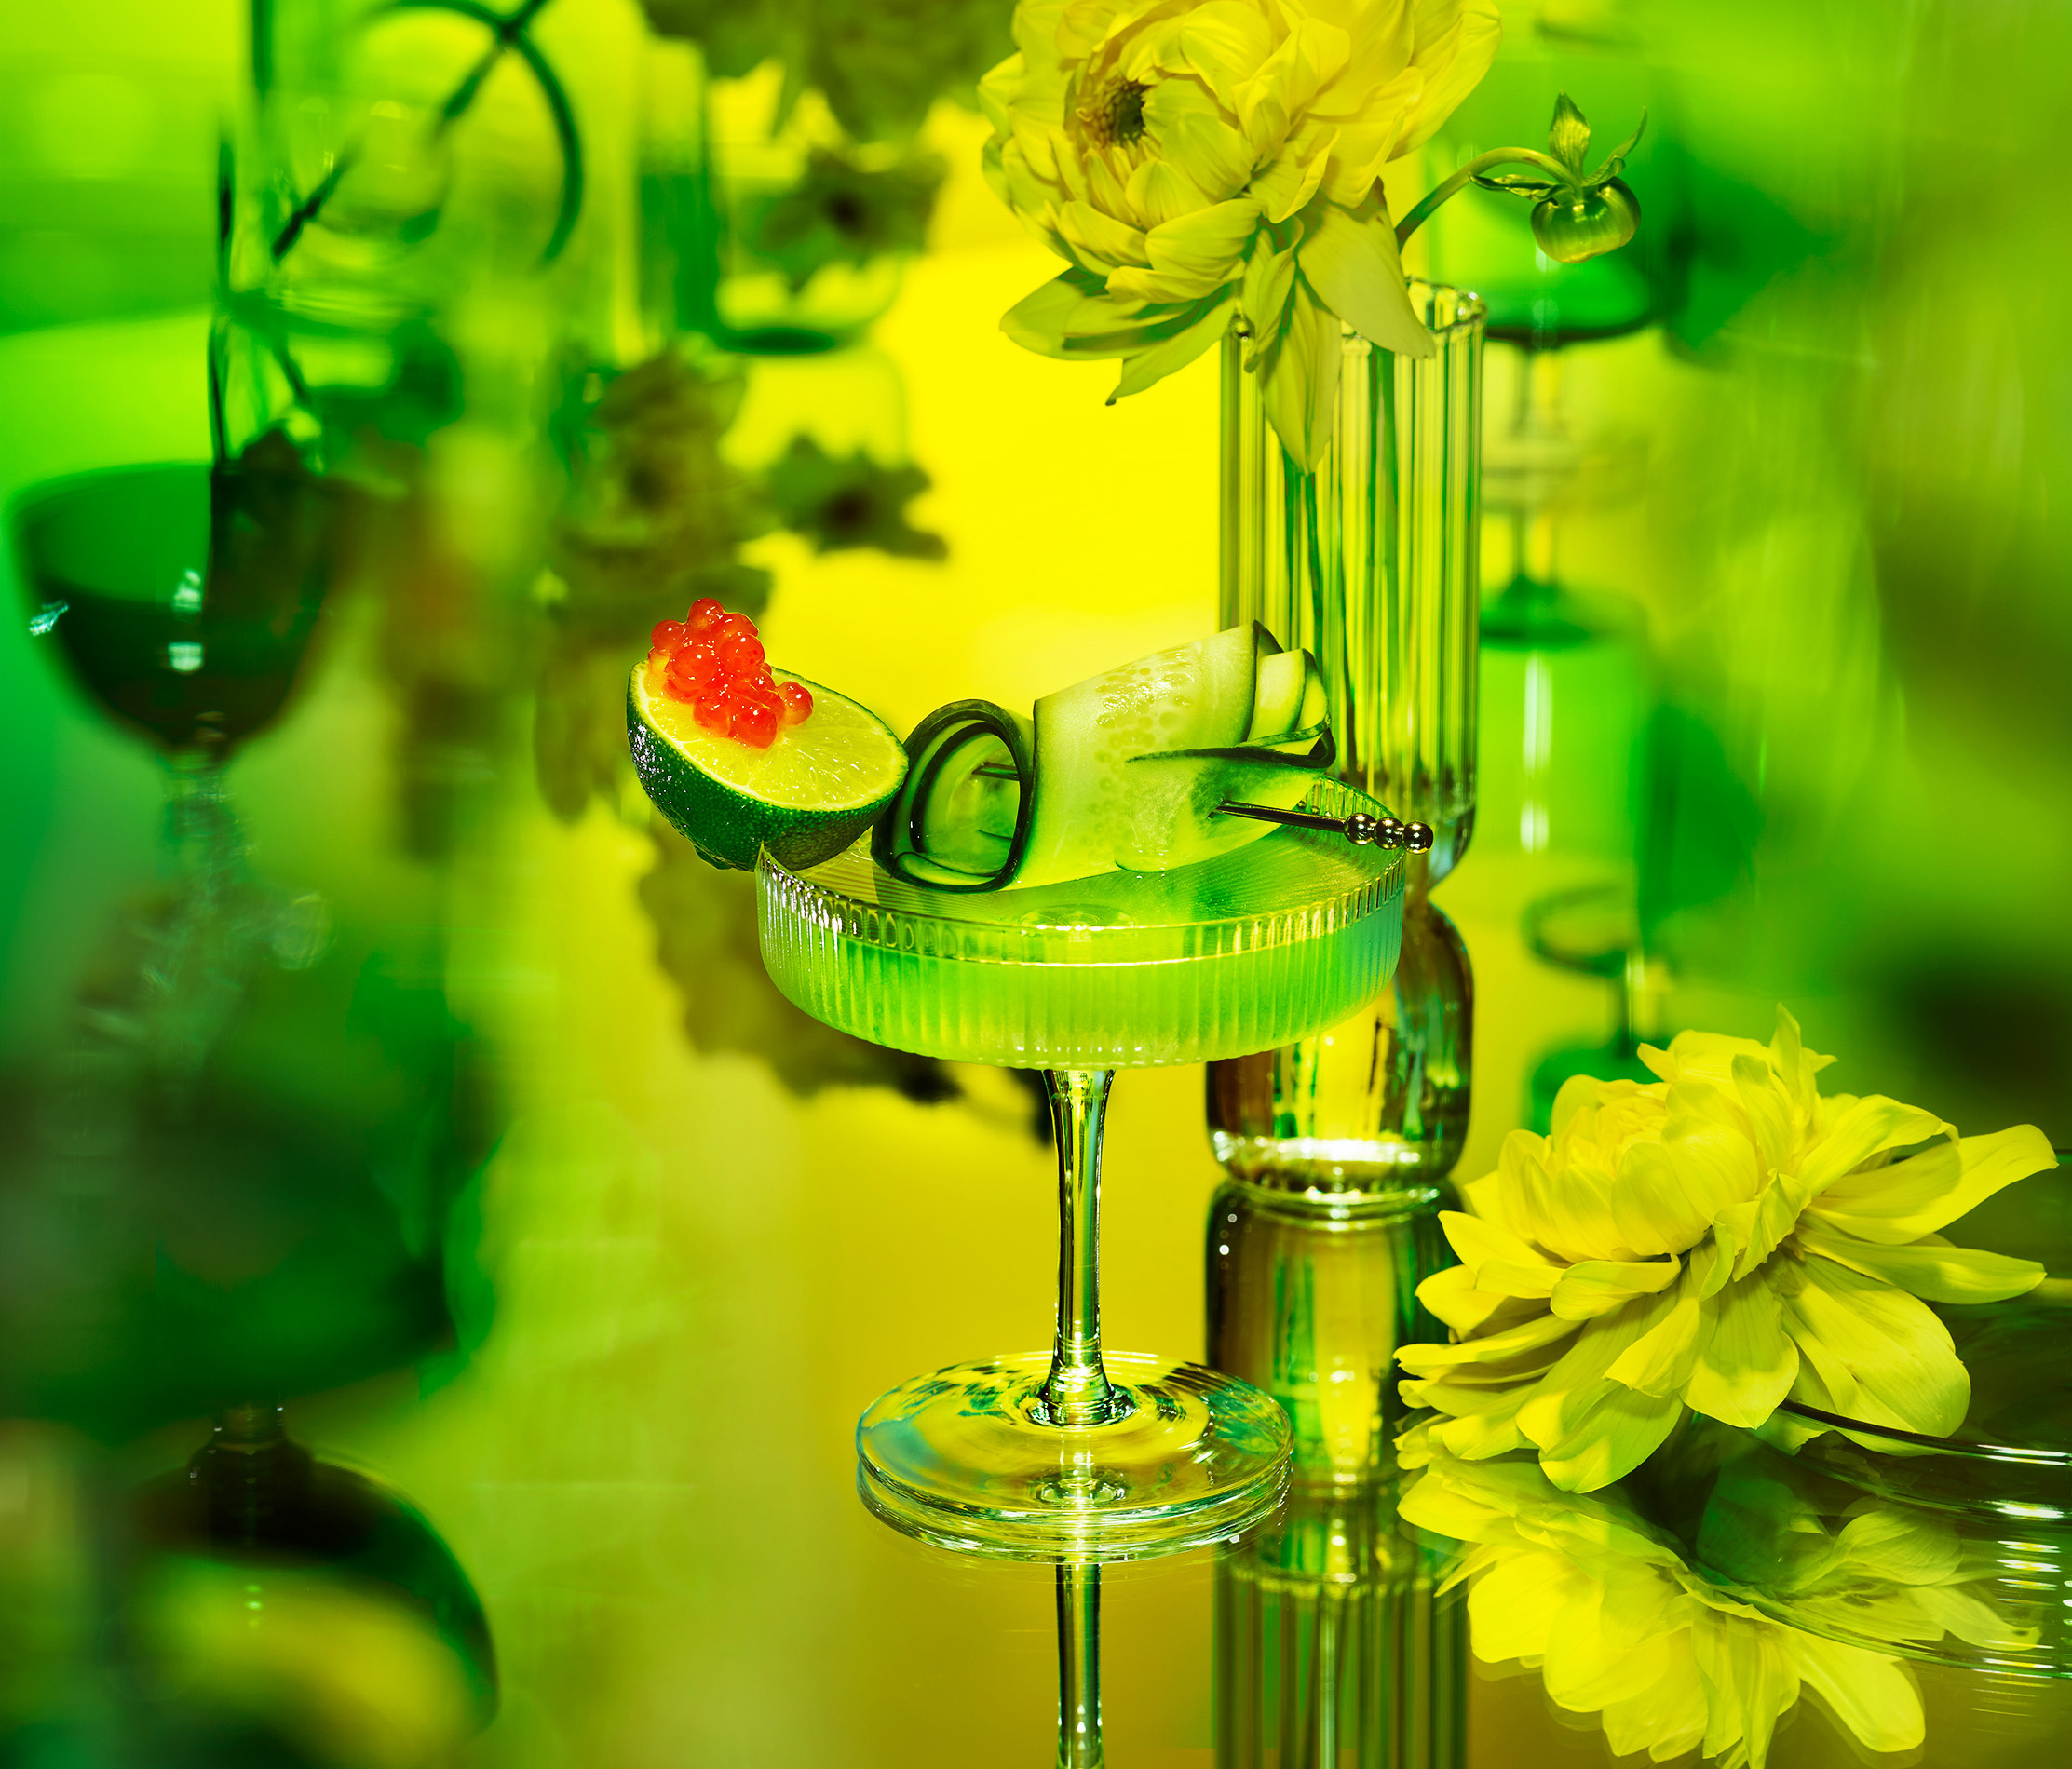 Annabelle_Breakey_Photography_Beverage_Photography_Cocktails_Yellow-Green-Drink_2